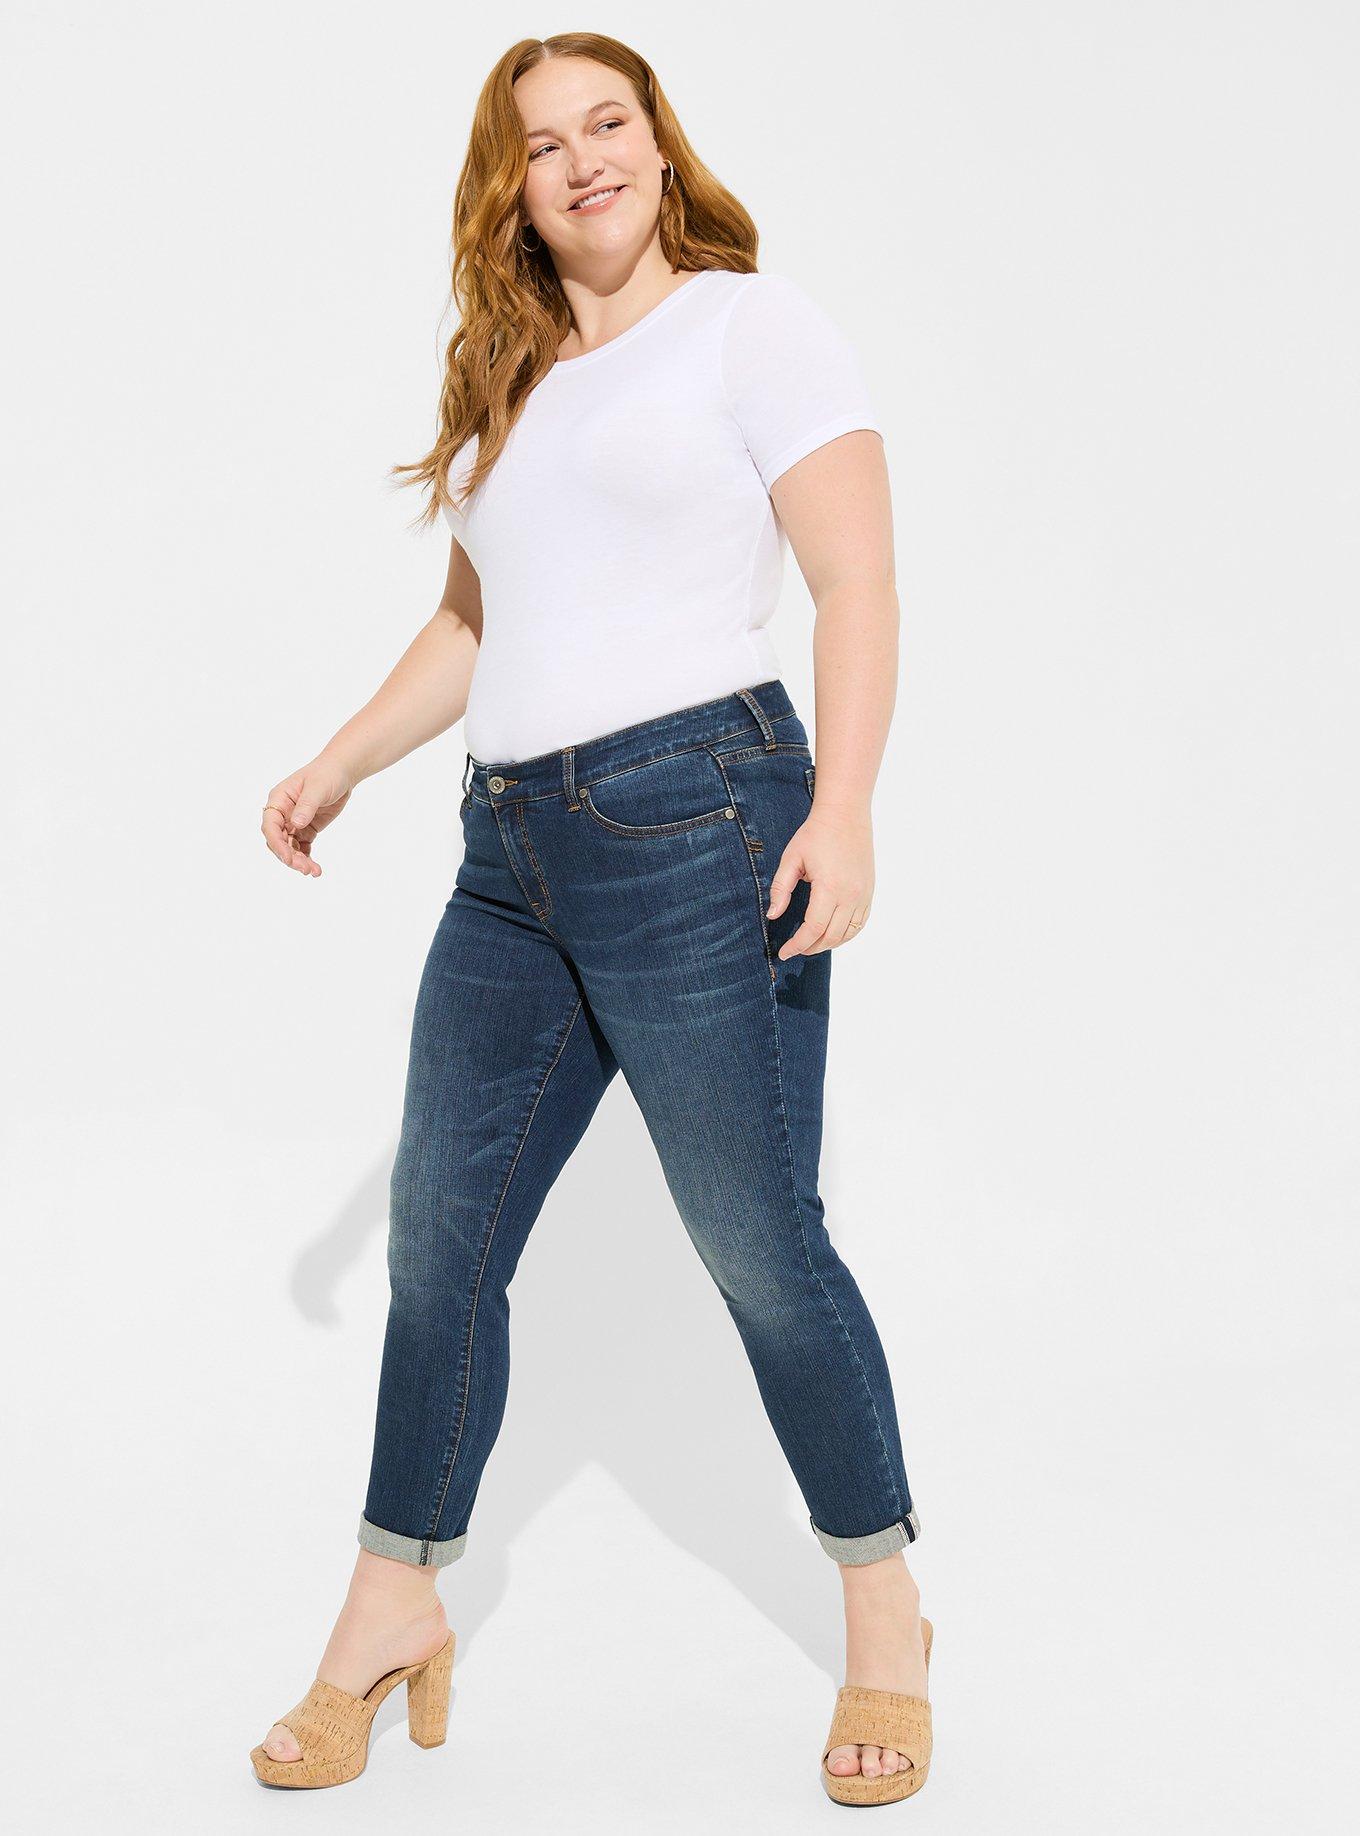 Women's Pants, Jeans and Capris. Sizes 16-20 - clothing